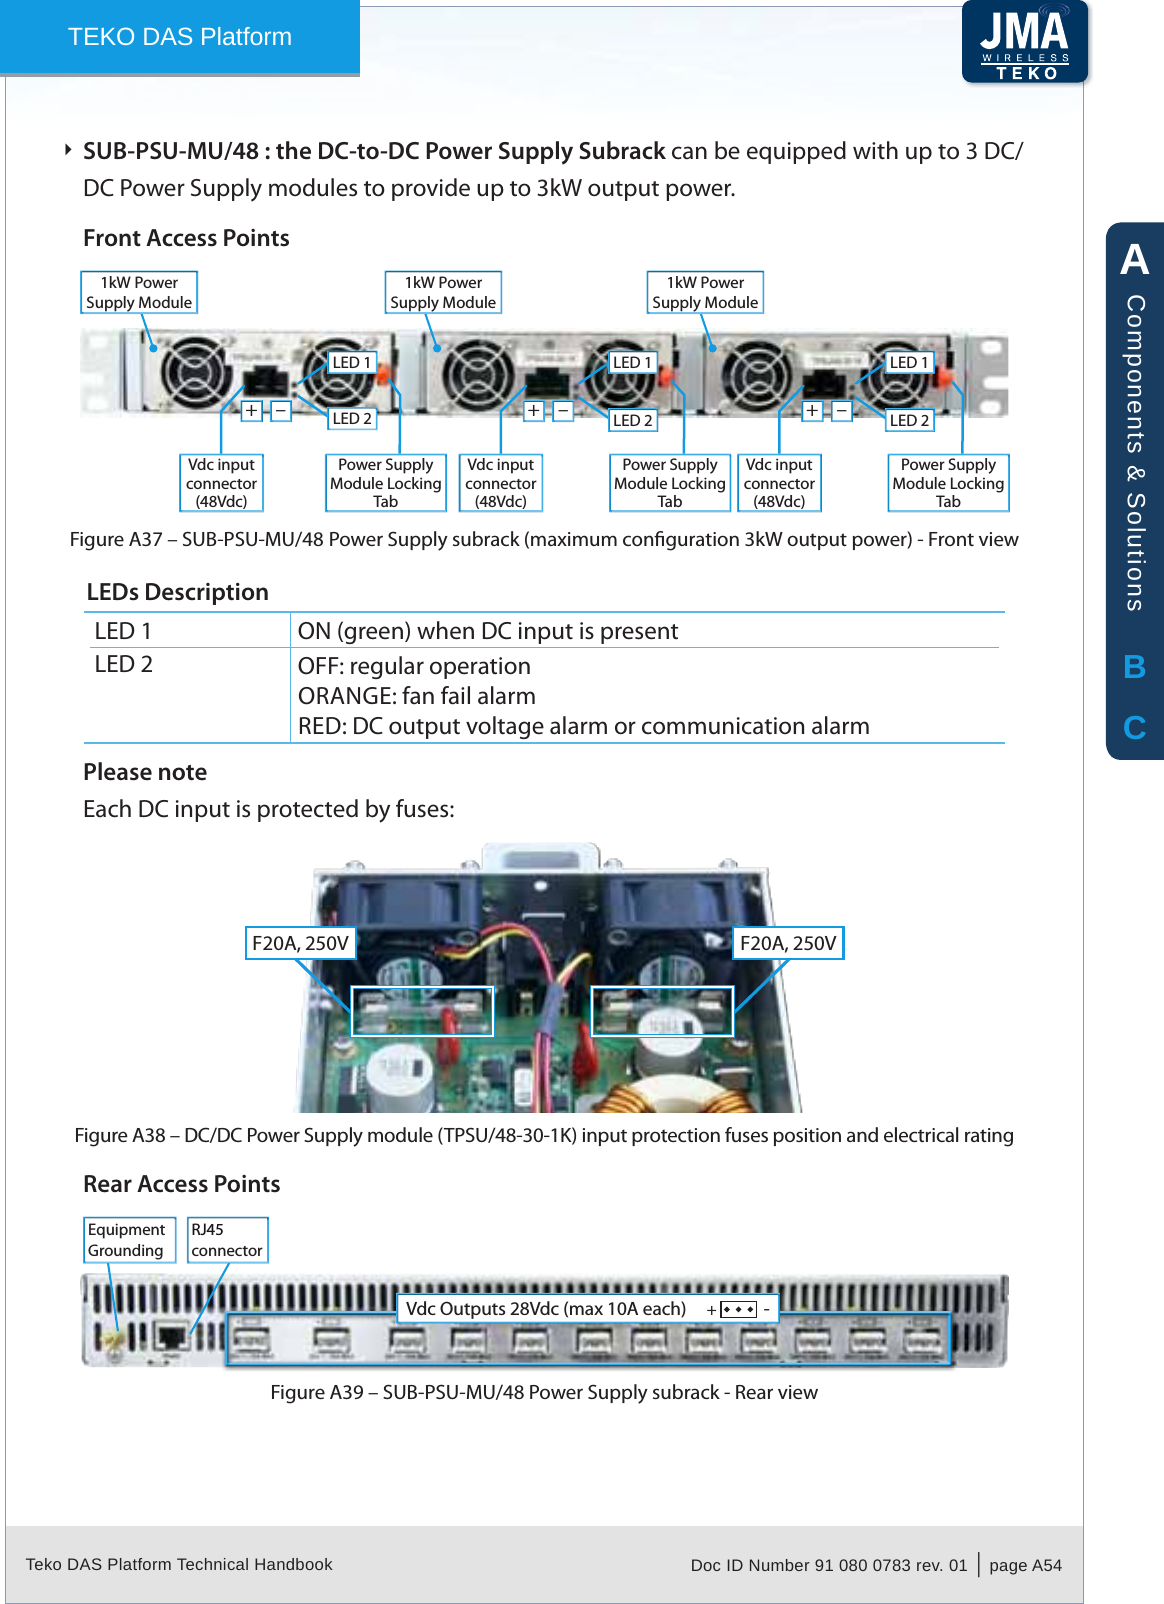 Teko DAS Platform Technical Handbook Doc ID Number 91 080 0783 rev. 01  |  page A54TEKO DAS PlatformSUB-PSU-MU/48 : the DC-to-DC Power Supply Subrack  Ìcan be equipped with up to 3 DC/DC Power Supply modules to provide up to 3kW output power.Front Access Points1kW Power Supply Module+ + +– – –1kW Power Supply Module1kW Power Supply ModuleVdc input connector (48Vdc)Vdc input connector (48Vdc)Vdc input connector (48Vdc)Power Supply Module Locking TabPower Supply Module Locking TabPower Supply Module Locking TabLED 1 LED 1 LED 1LED 2 LED 2 LED 2SUB-PSU-MU/48Figure A37 –   Power Supply subrack (maximum conguration 3kW output power) - Front viewLEDs DescriptionLED 1 ON (green) when DC input is presentLED 2 OFF: regular operationORANGE: fan fail alarmRED: DC output voltage alarm or communication alarmPlease noteEach DC input is protected by fuses: F20A, 250V F20A, 250VDC/DC Power Supply module (TPSU/48-30-1K) input protection fuses position and electrical ratingFigure A38 – Rear Access PointsVdc Outputs 28Vdc (max 10A each)     +    - EquipmentGroundingRJ45connectorSUB-PSU-MU/48 Power Supply subrack - Rear viewFigure A39 – ABCComponents &amp; Solutions